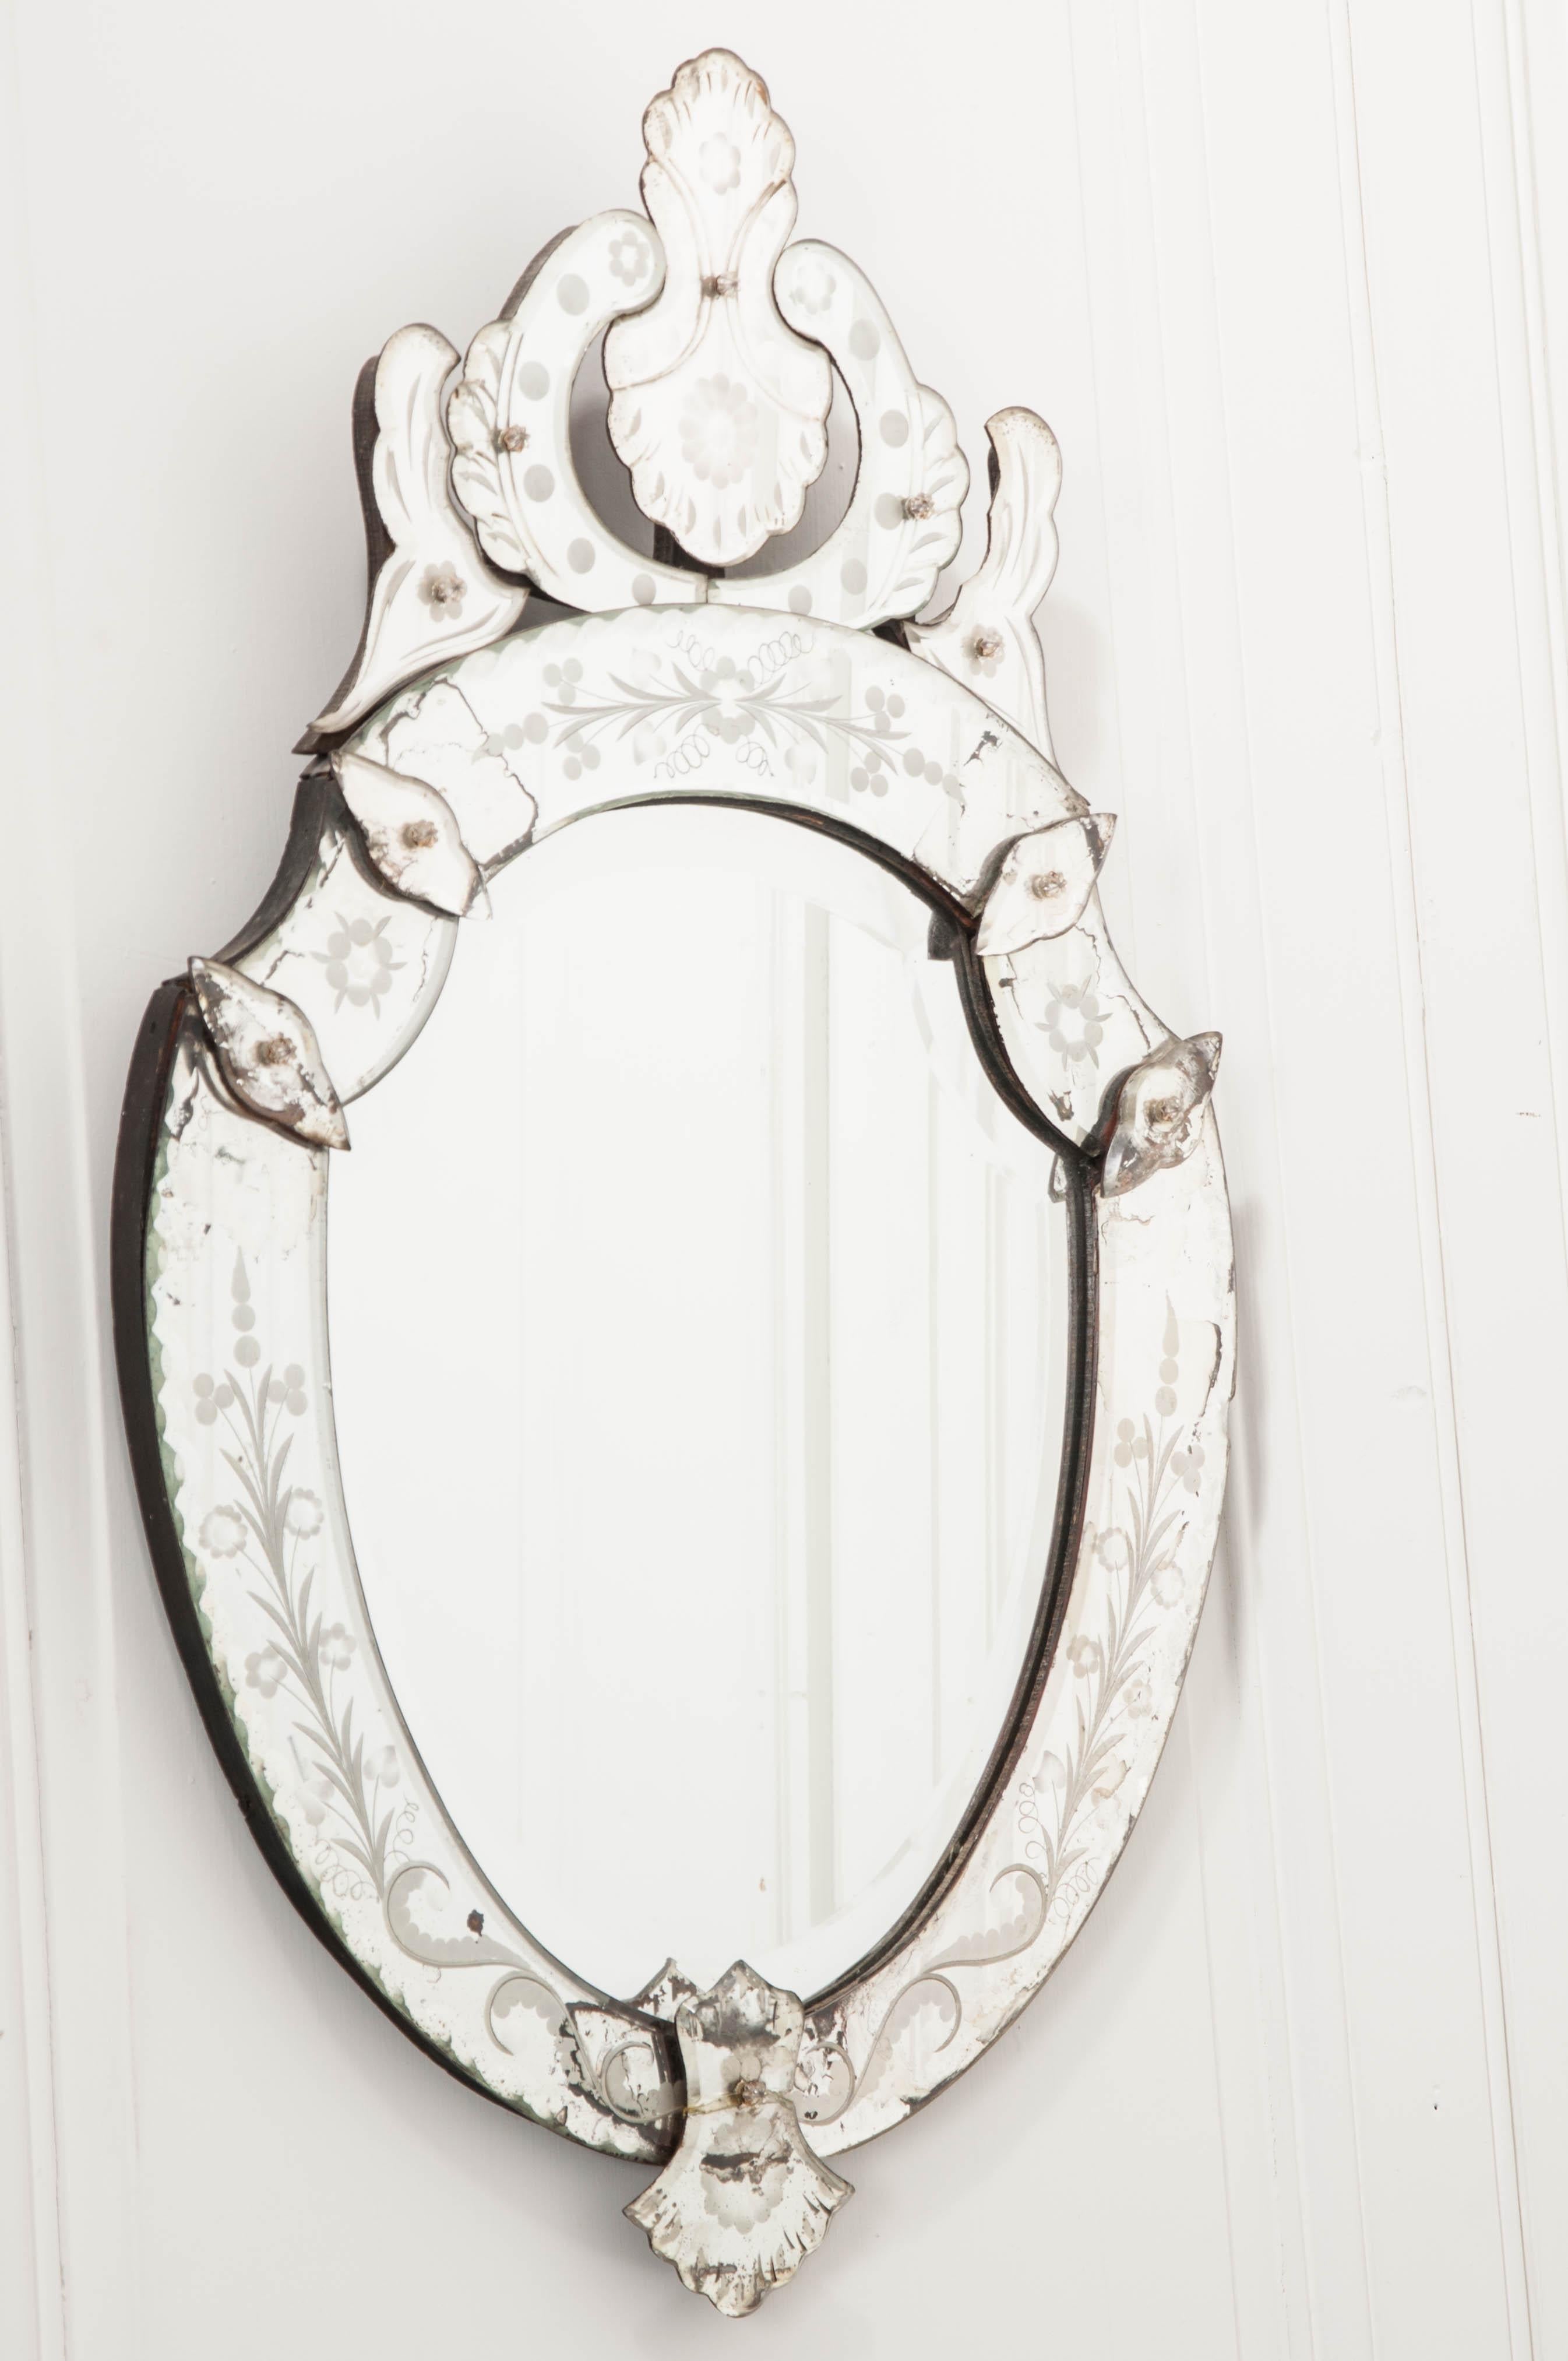 A stunning Venetian wall mirror, with wonderful shield form, from 1880s Italy. The antique uses beautifully shaped mirror pieces, held together with fasteners that are capped in crystal. Every aspect of the mirror is reflective and brilliant. All